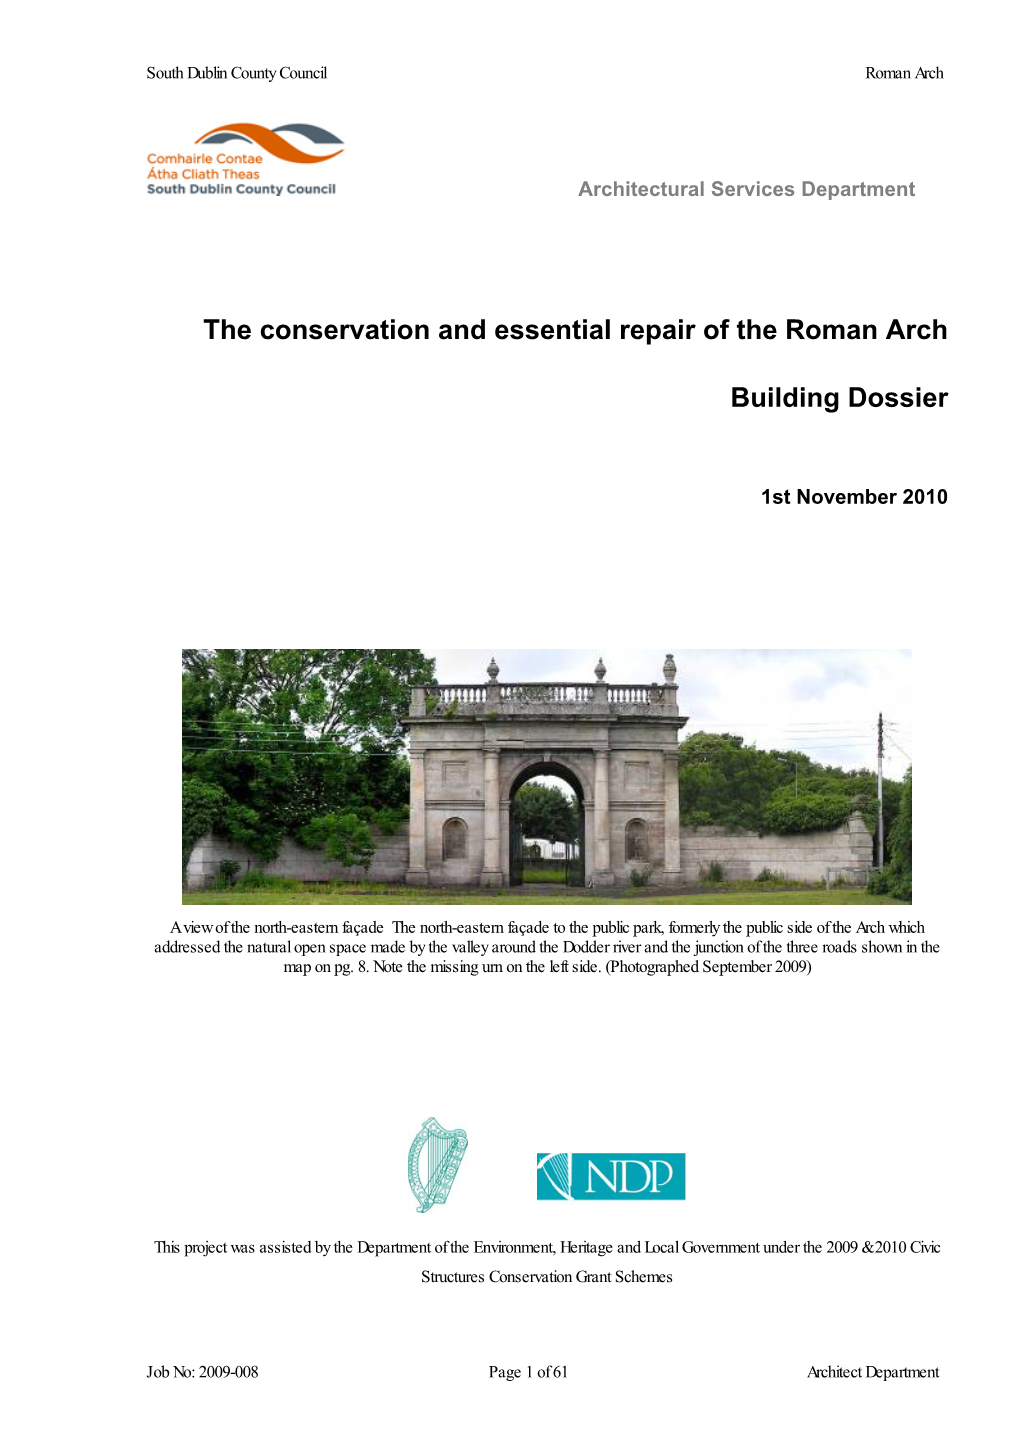 The Conservation and Essential Repair of the Roman Arch Building Dossier